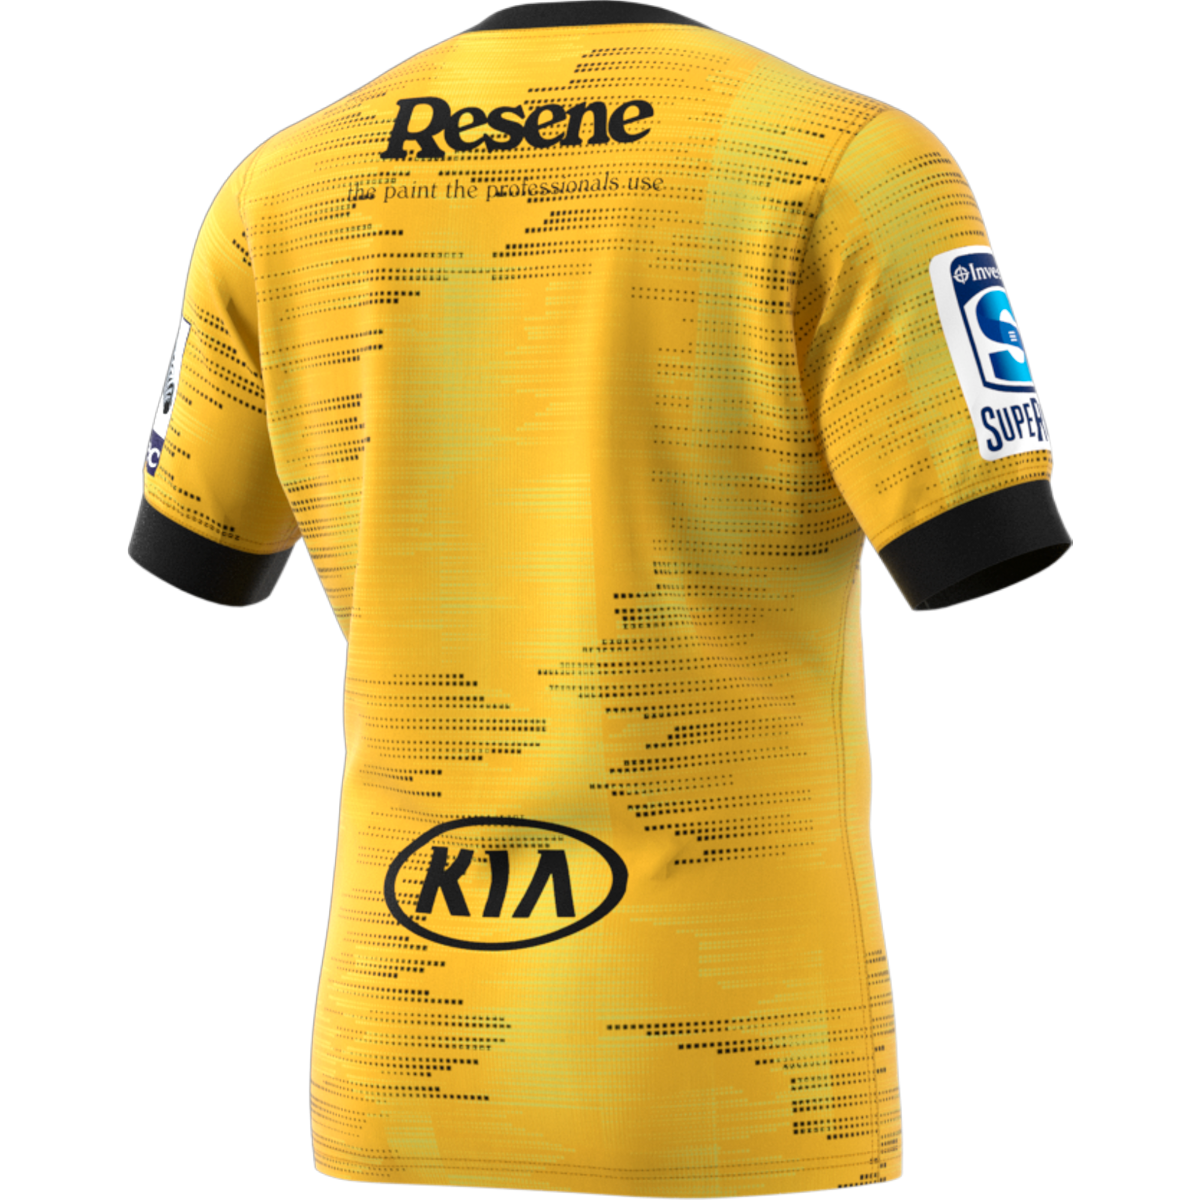 Hurricanes Home Jersey 2020